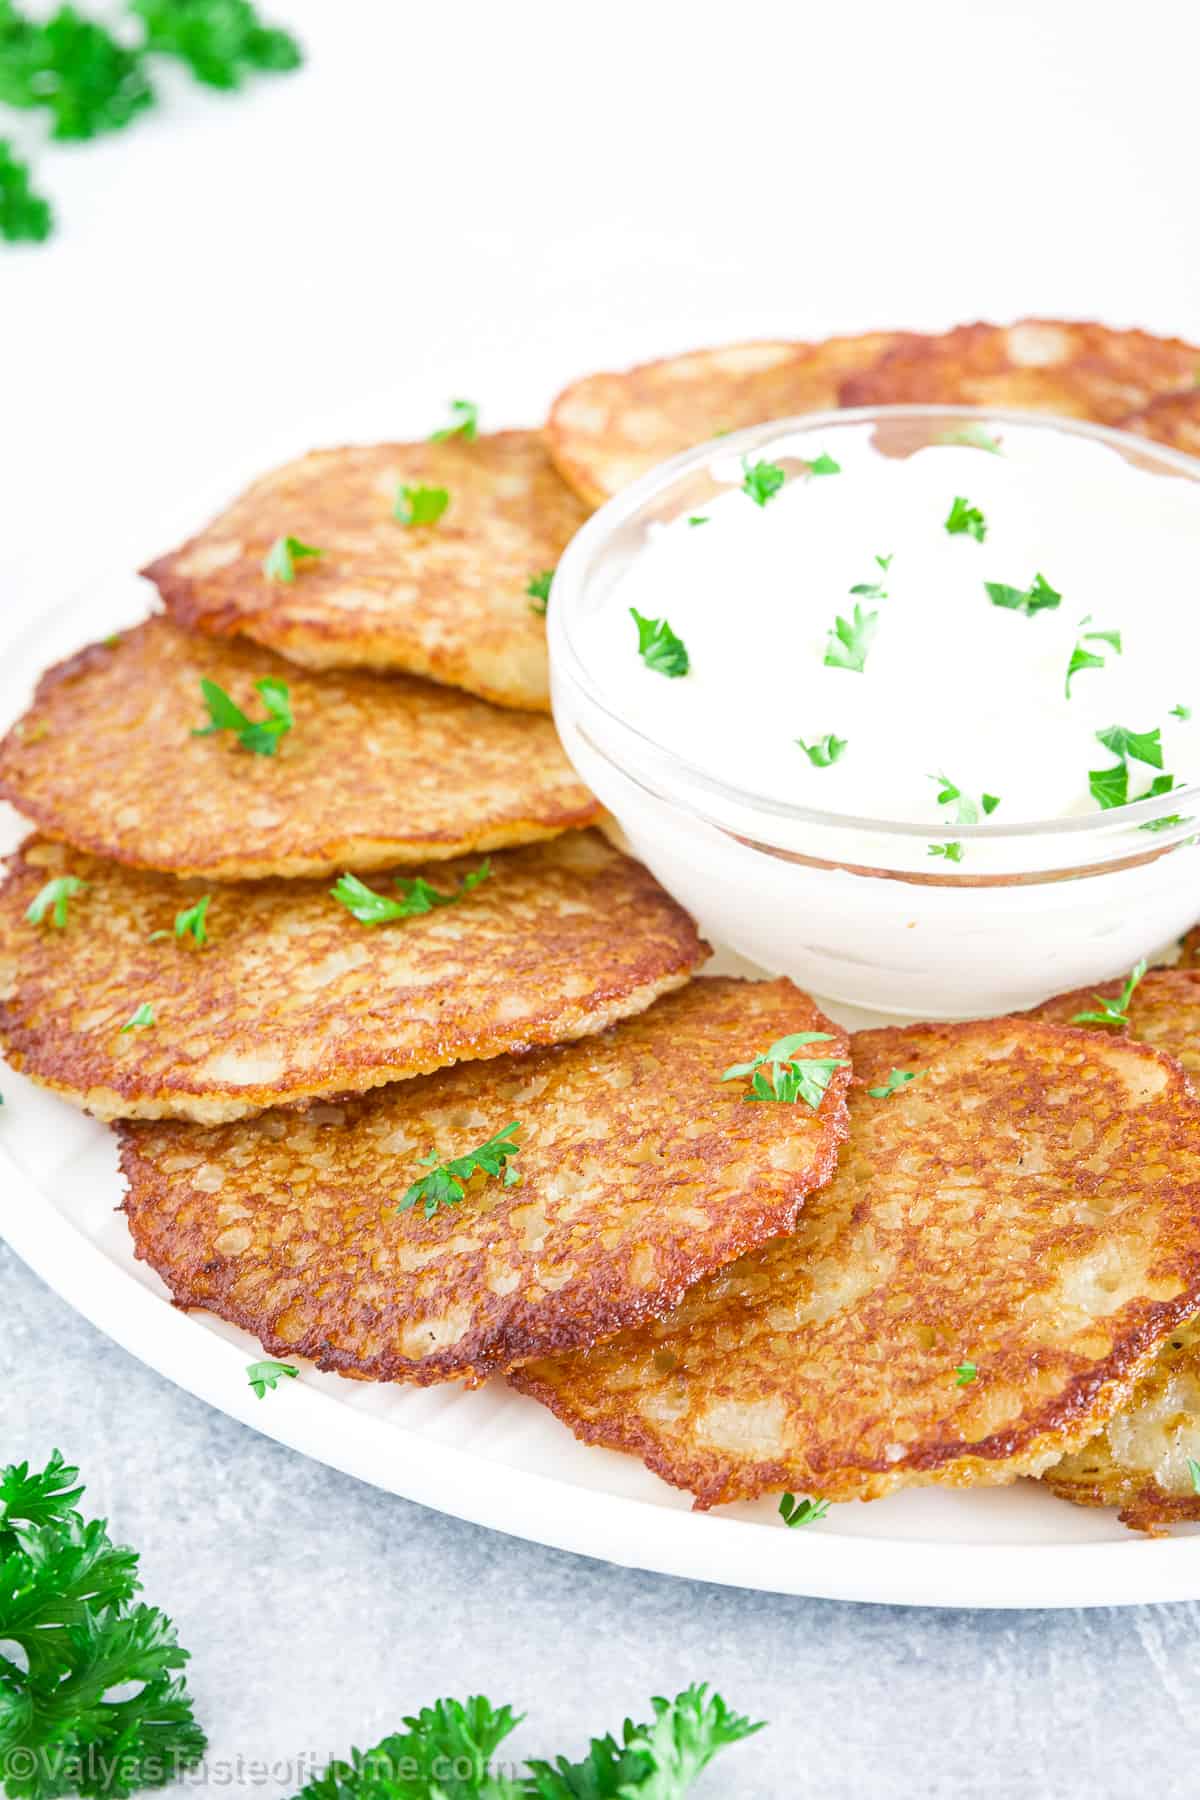 These golden-brown pancakes are made from grated potatoes, garlic, onions, and a few other ingredients, resulting in a dish that is both satisfying and comforting.